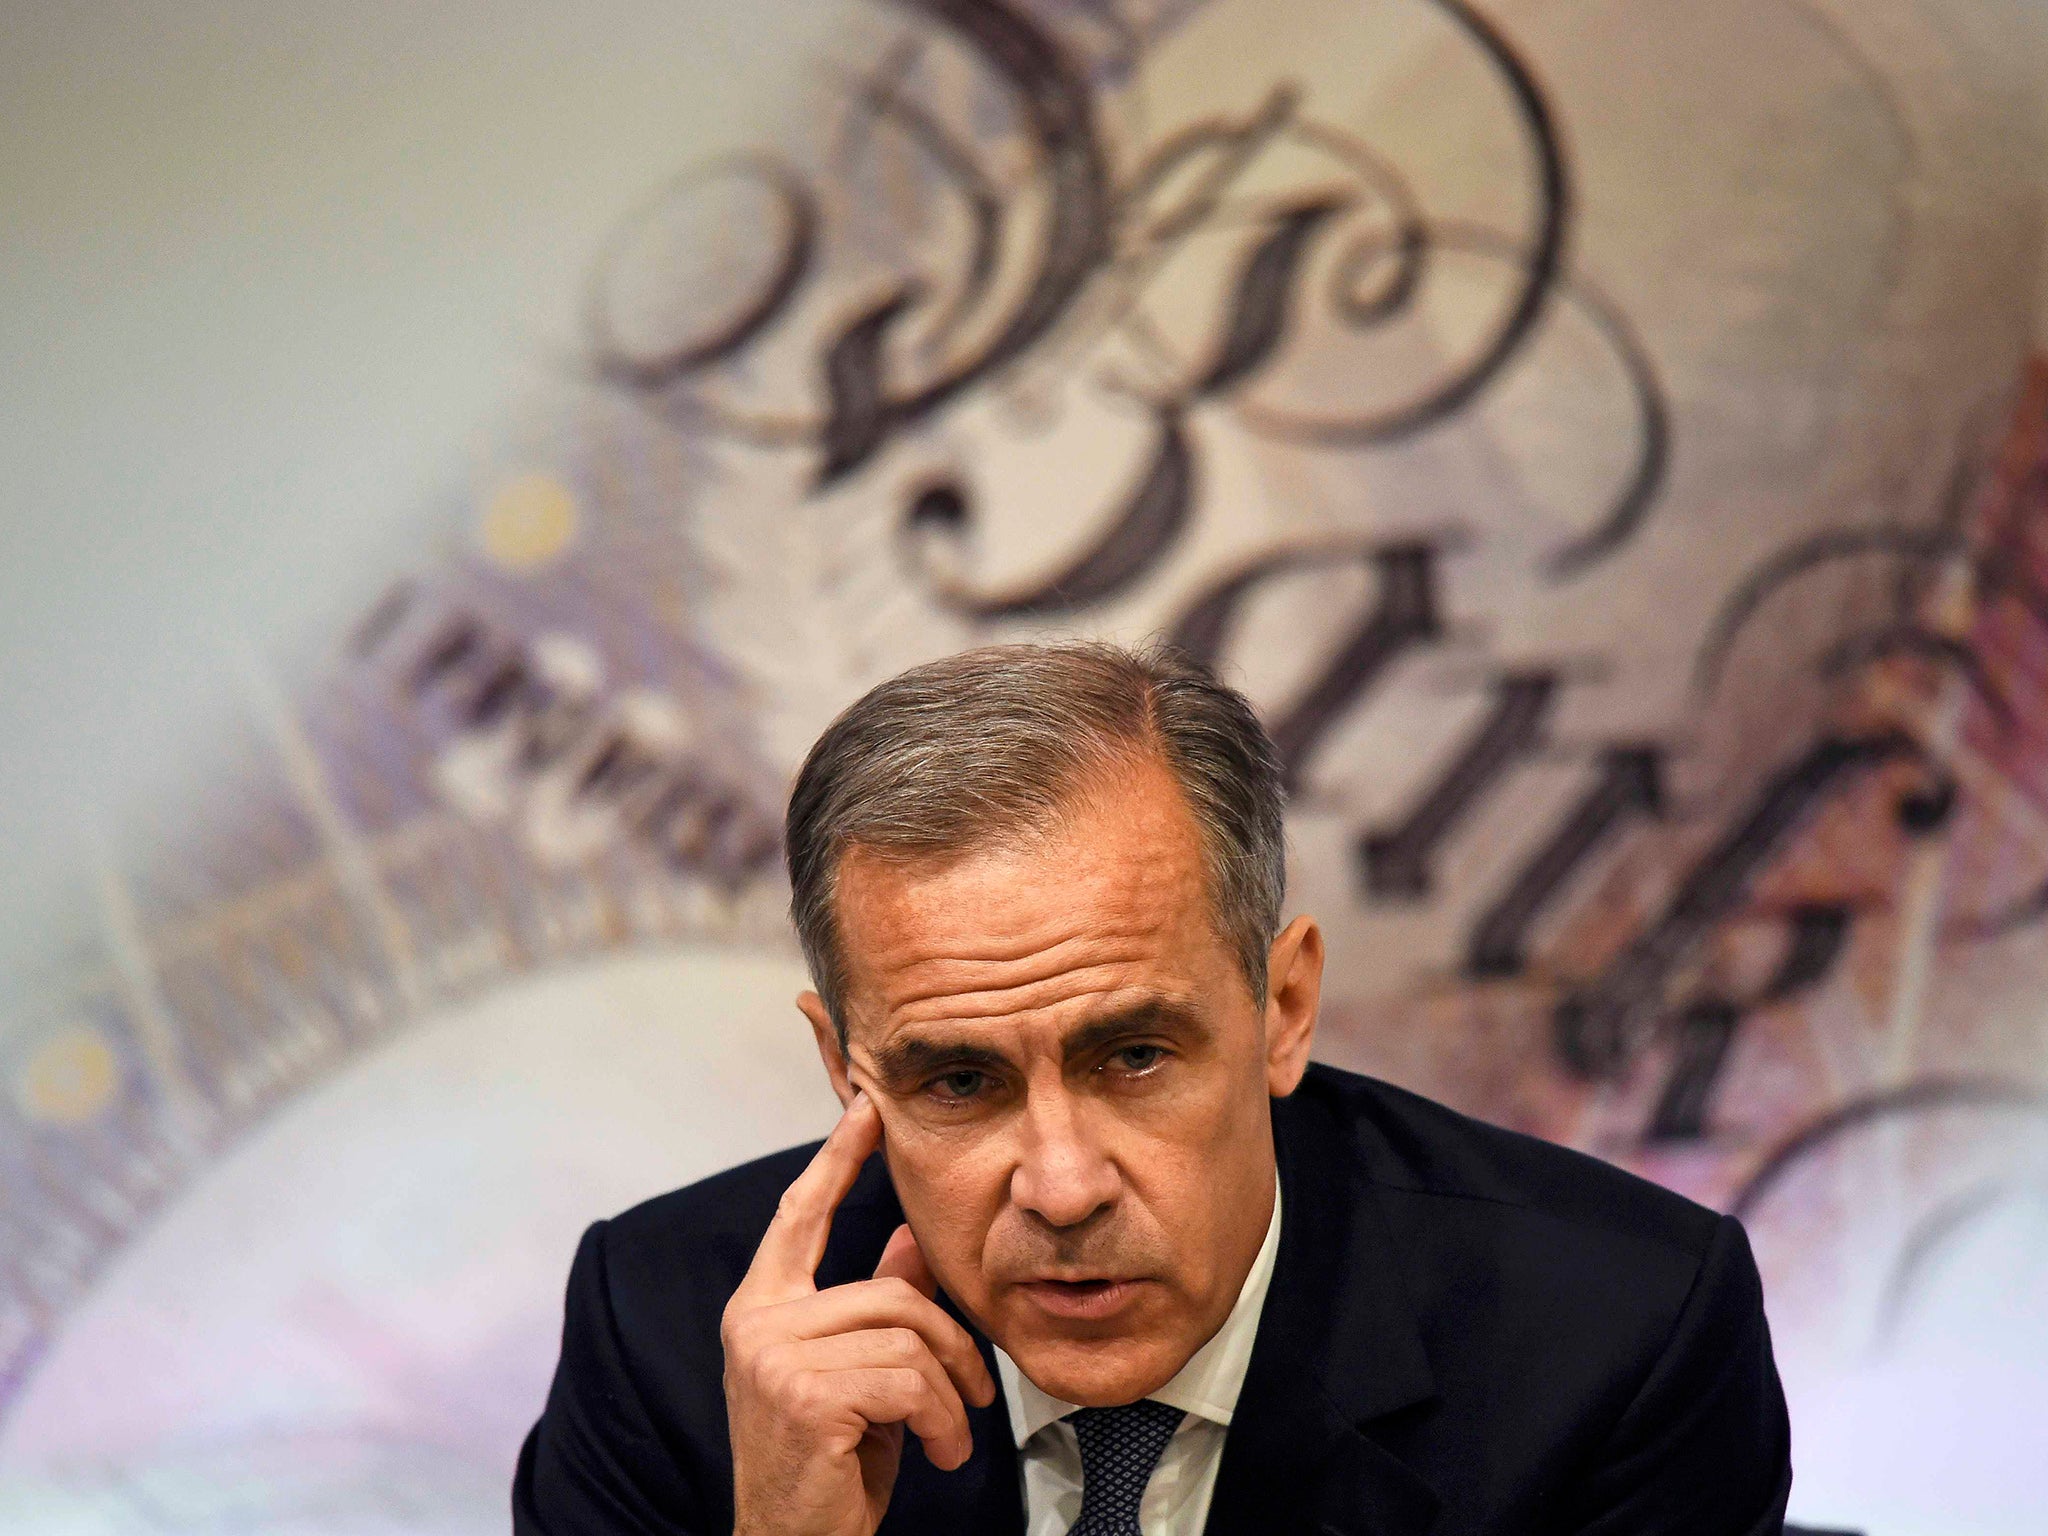 Carney said conclusions about Brexit were reached from reports presented to committees and that the Governor had no power to influence them